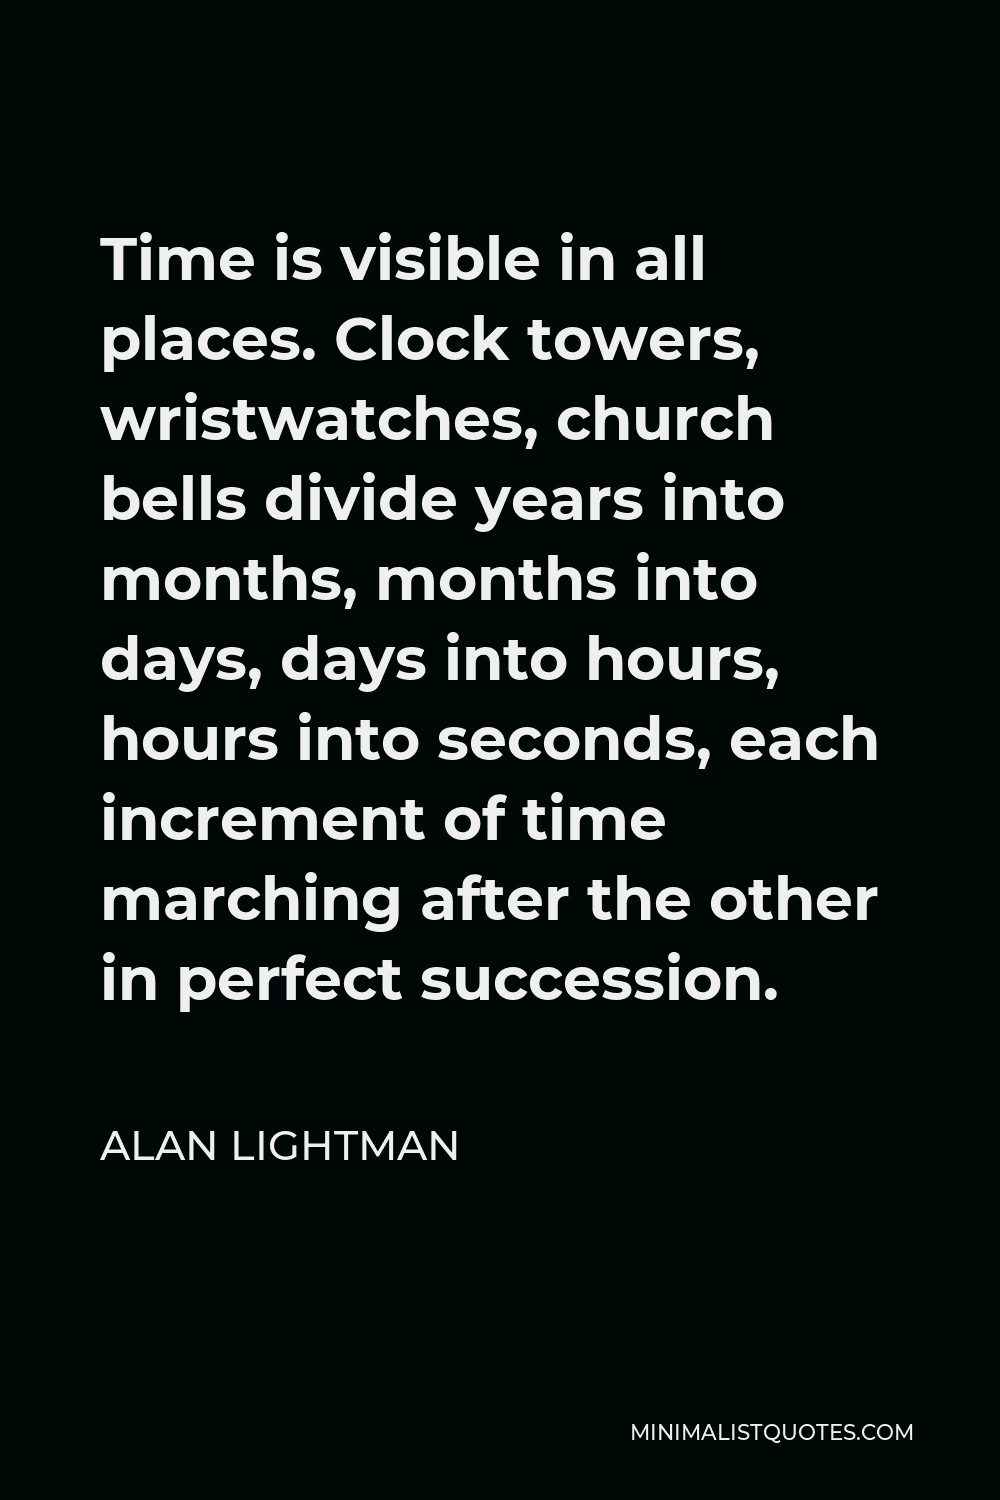 Alan Lightman Quote - Time is visible in all places. Clock towers, wristwatches, church bells divide years into months, months into days, days into hours, hours into seconds, each increment of time marching after the other in perfect succession.